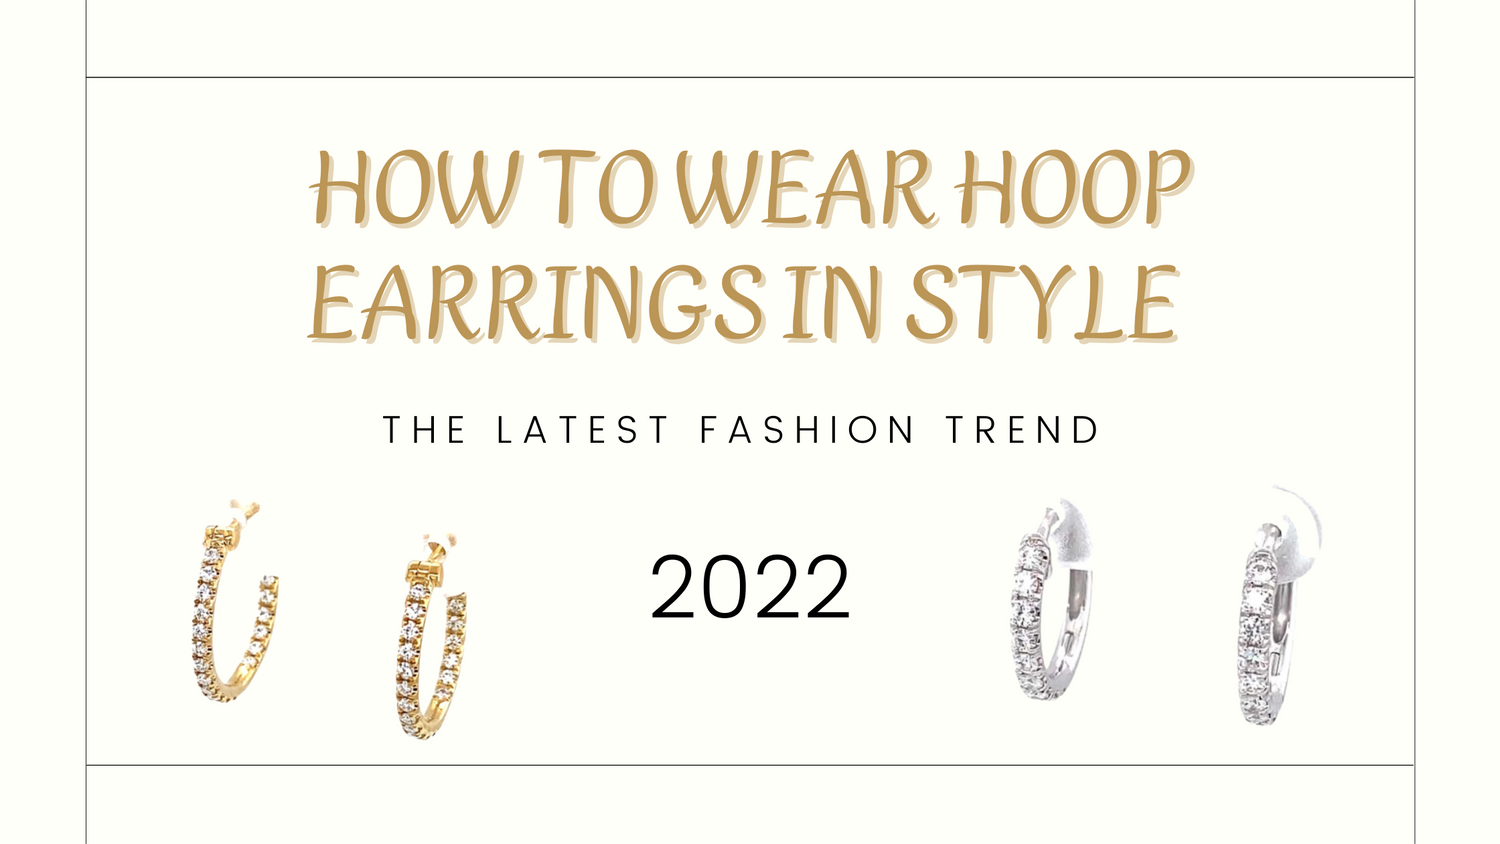 How to Wear Hoop Earrings in Style: The Latest Fashion Trend 2022